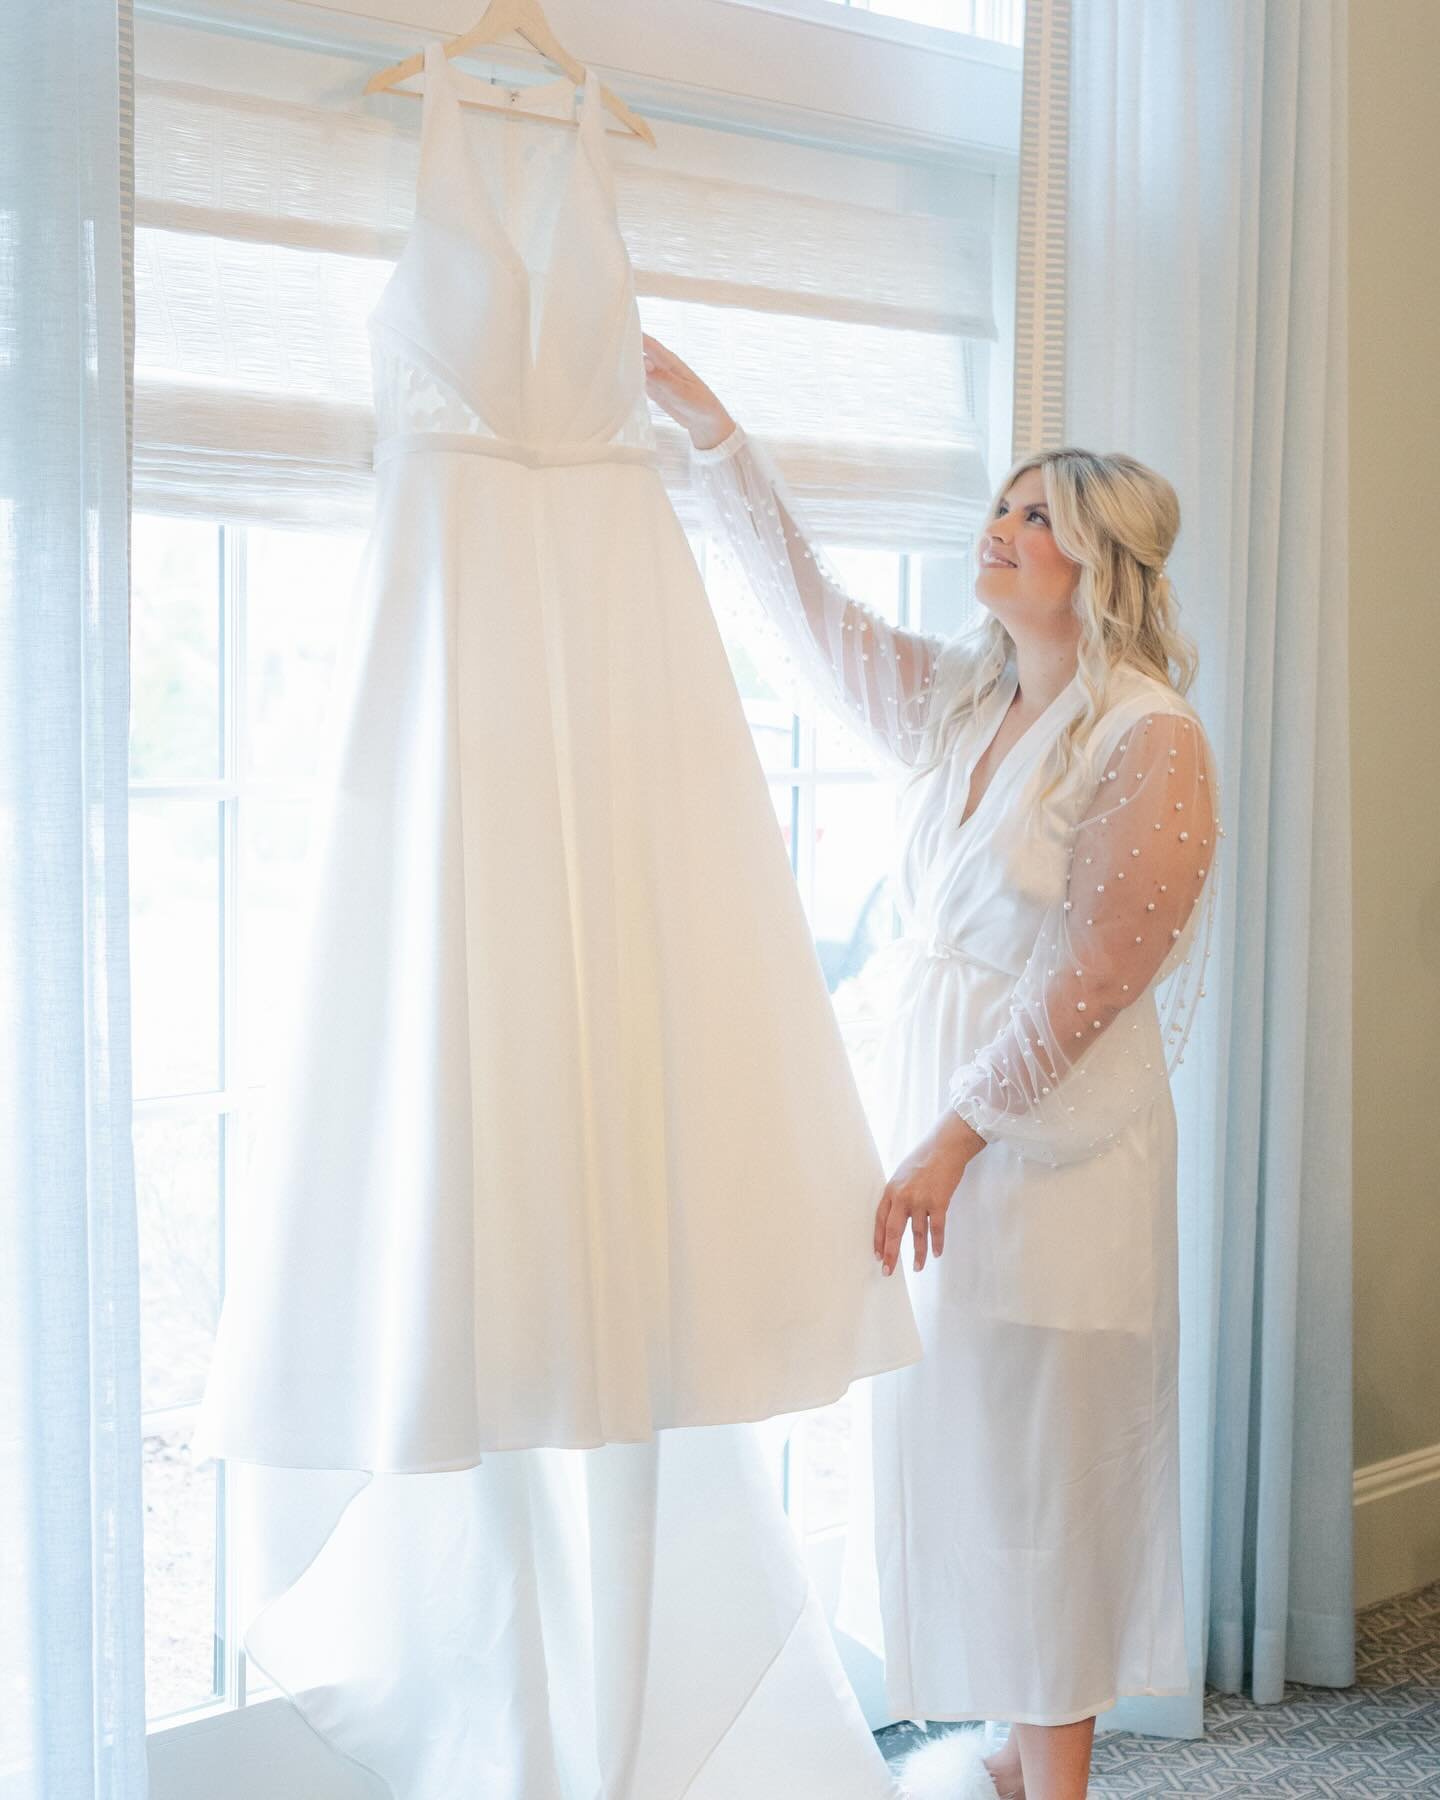 The wedding dress is one of if not the most important piece of your wedding day details ! 

Go into the shopping day with ideas but be open to suggestions by the stylist ❤️

Photo 1- dress @bellabridesmaidsatlanta 
Photo 2- Dress @whitemagnoliabridal